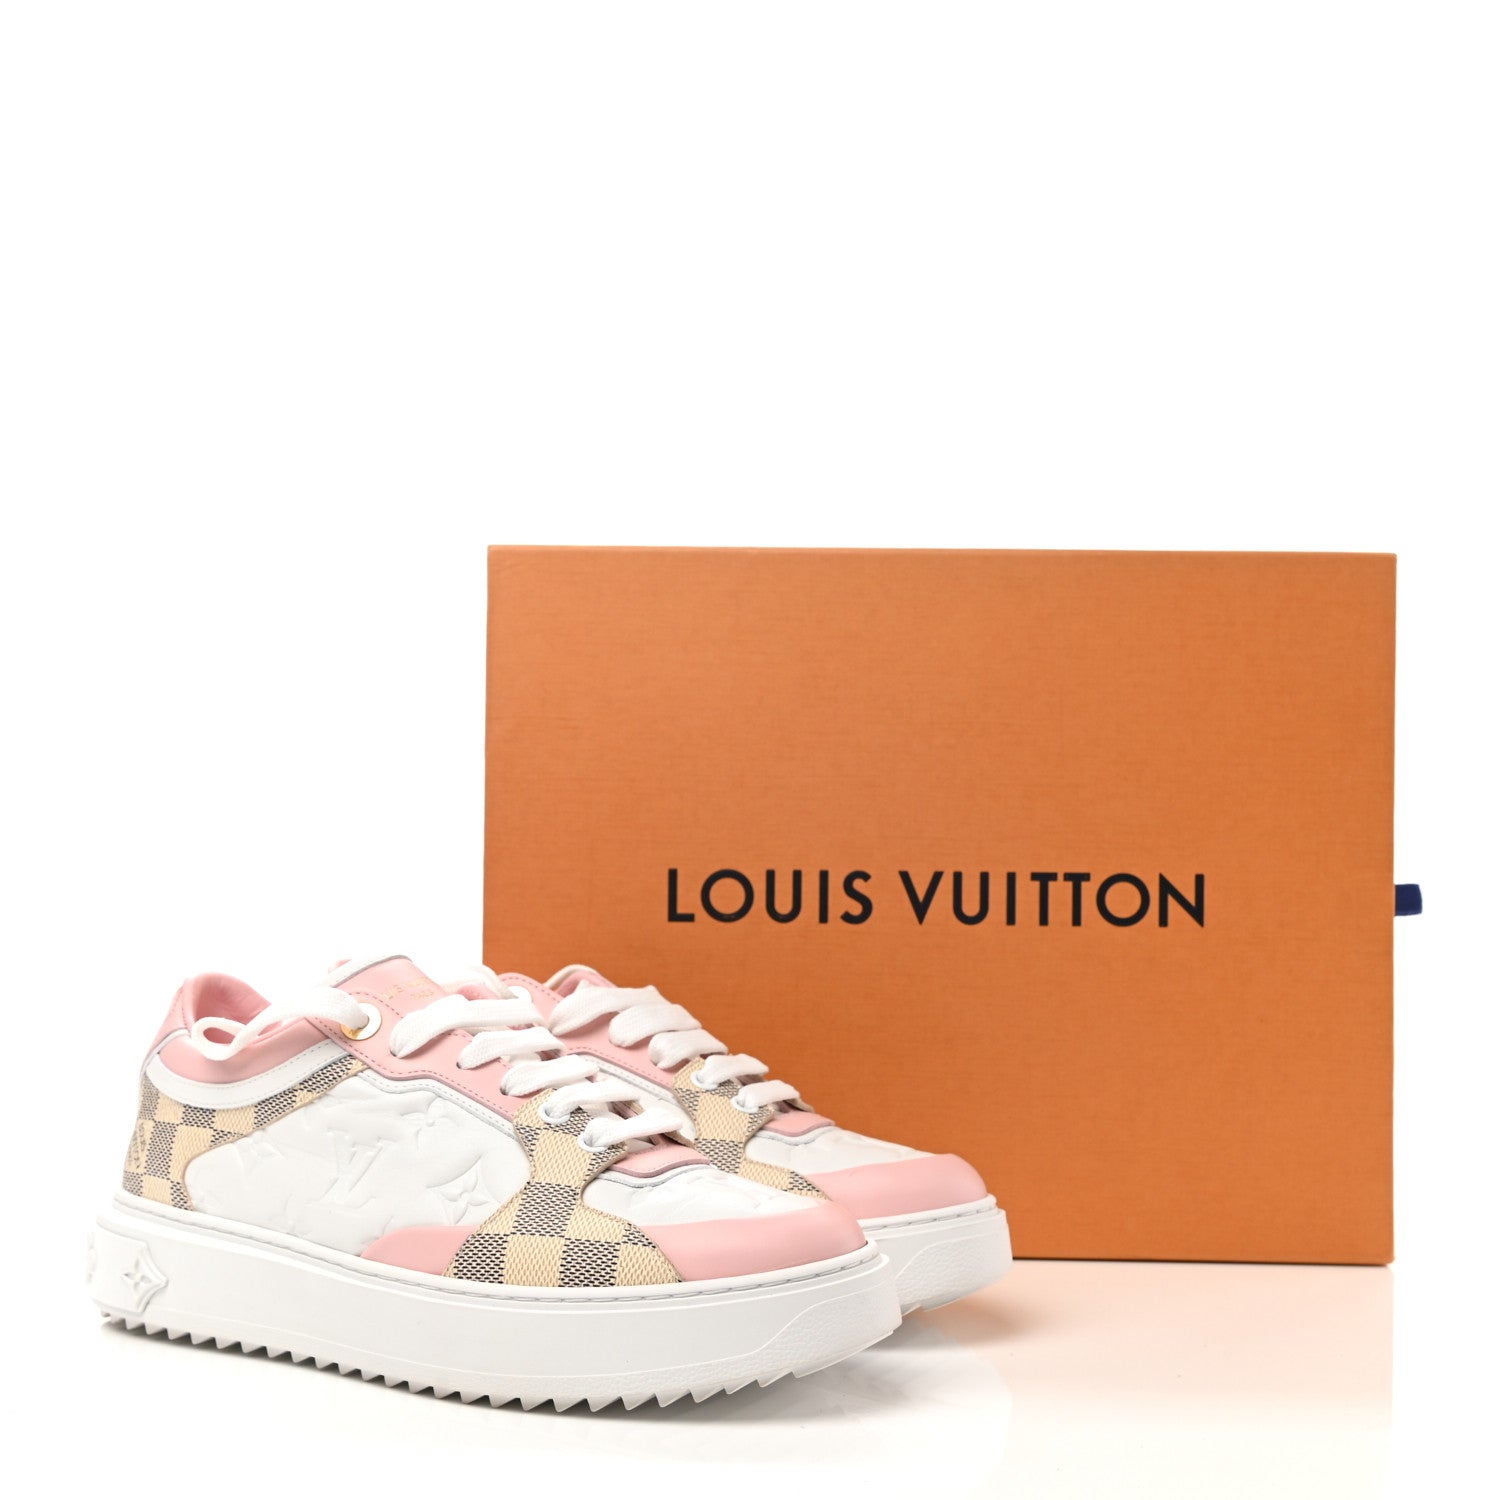 Louis Vuitton Monogram Embossed Calfskin Damier Azur Time Out Sneakers 37 Rose Clair Pink